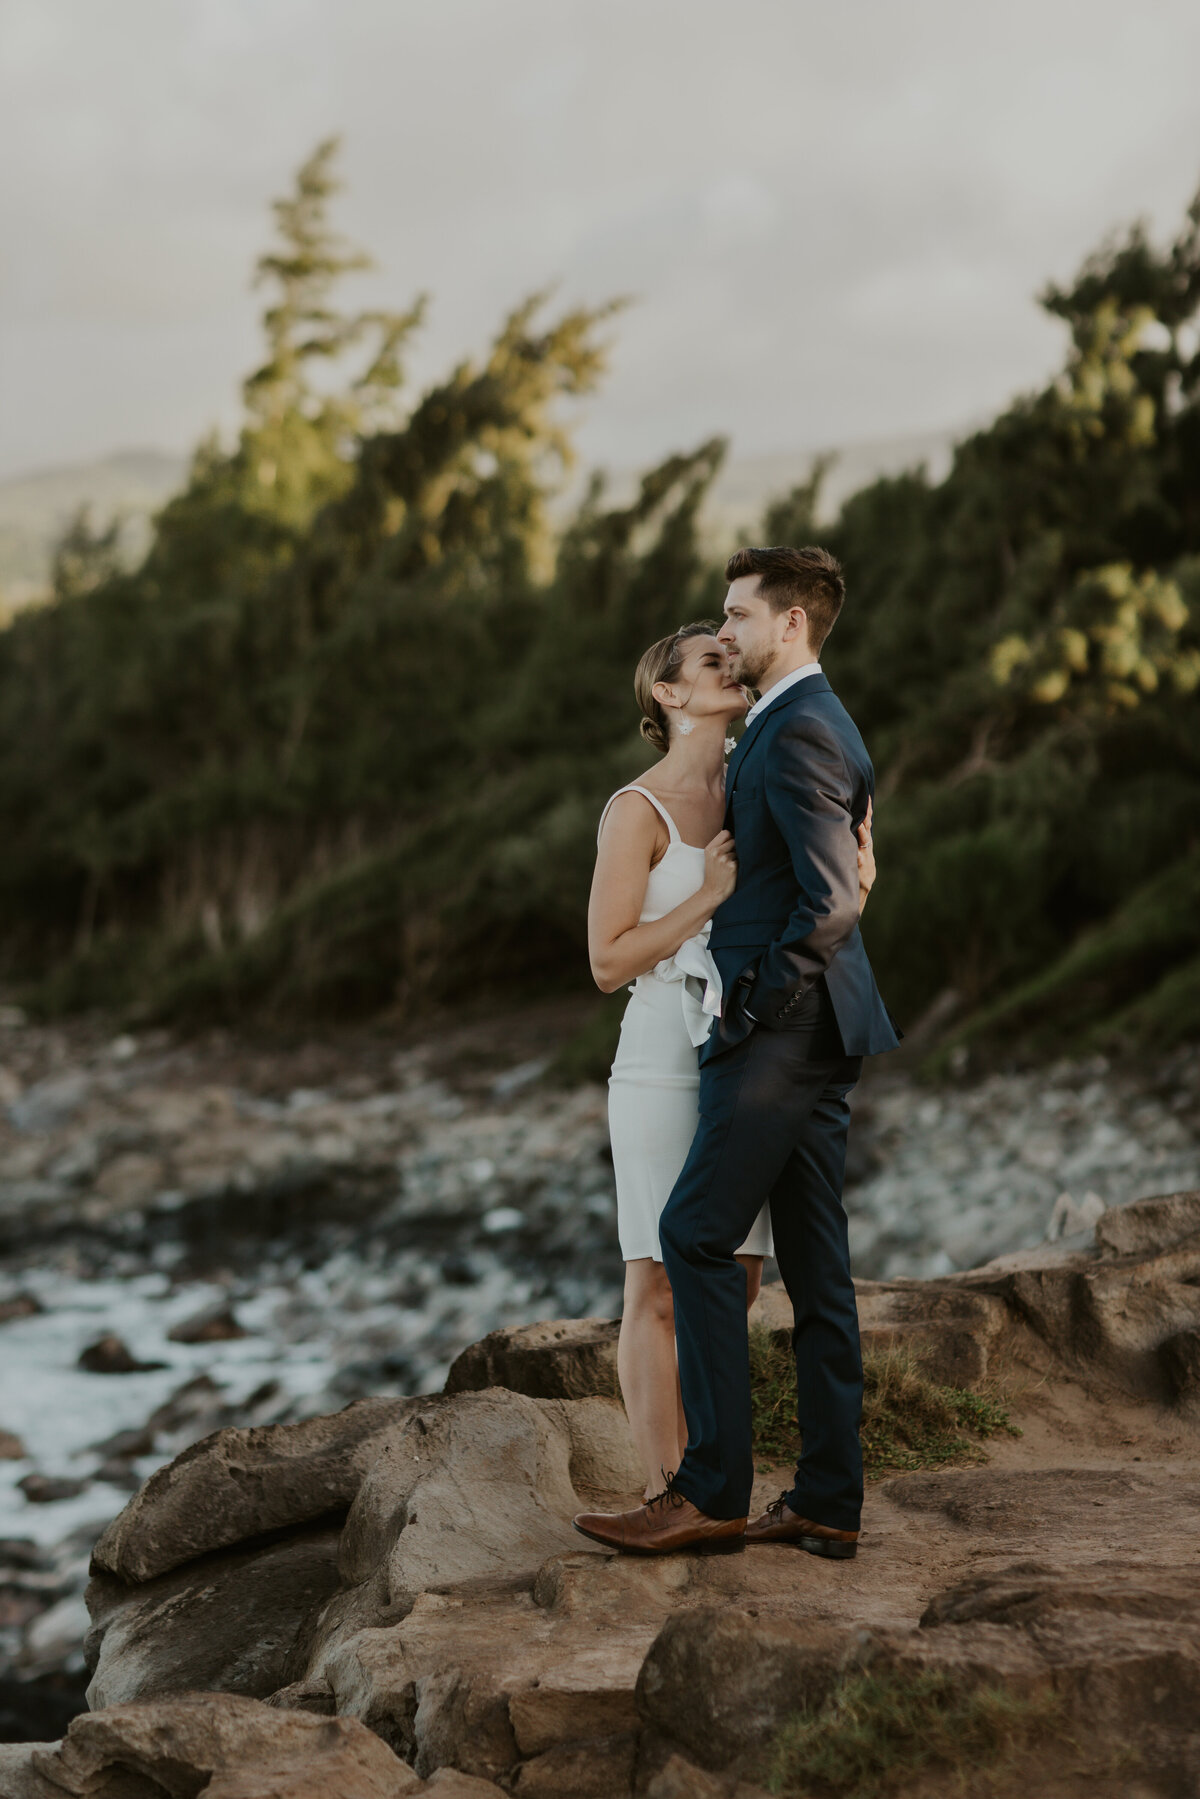 Stunning Simple Elopement on the Beach